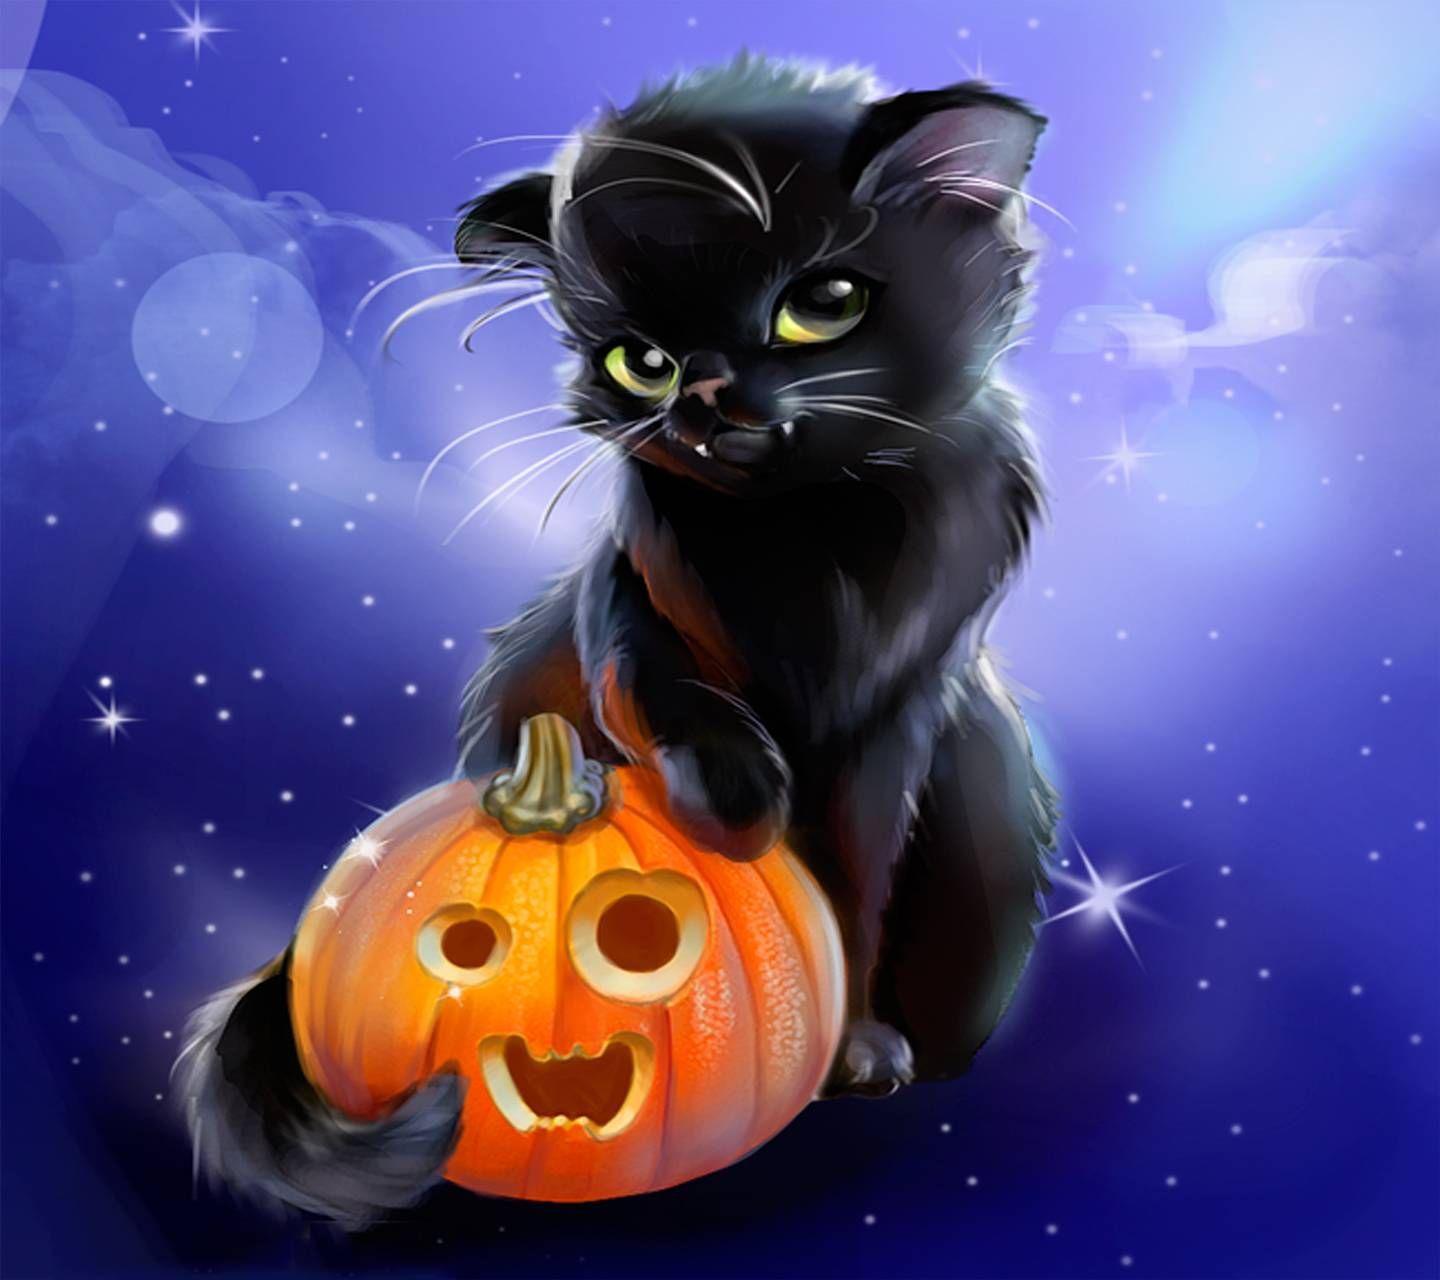 Download Halloween Kitty Wallpaper by Venus_ now. Browse millions of popular halloween Wal. Halloween cat, Halloween picture, Halloween art